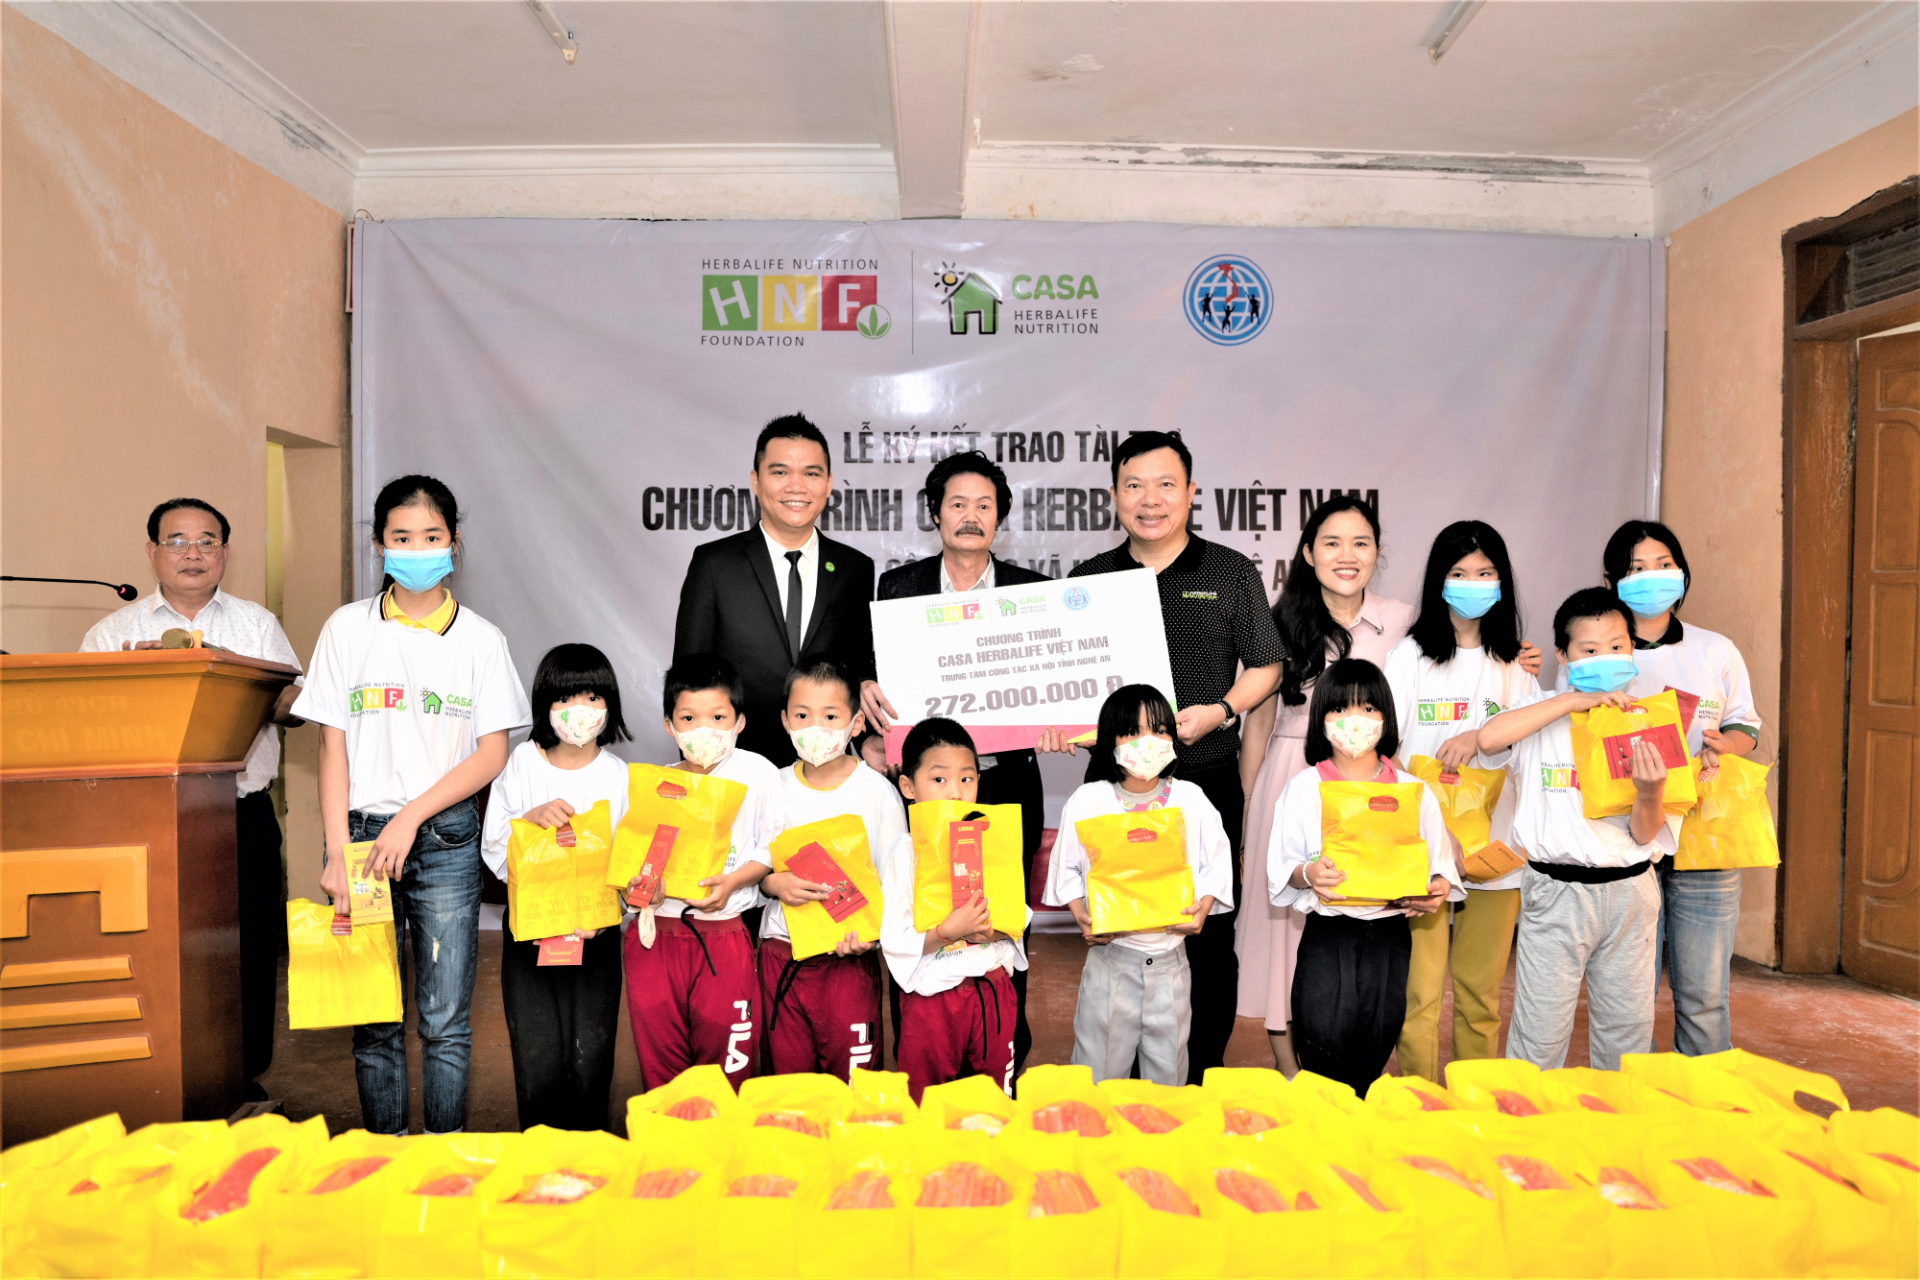 Herbalife Vietnam providing daily nutrition support to 1,000 needy children nationwide